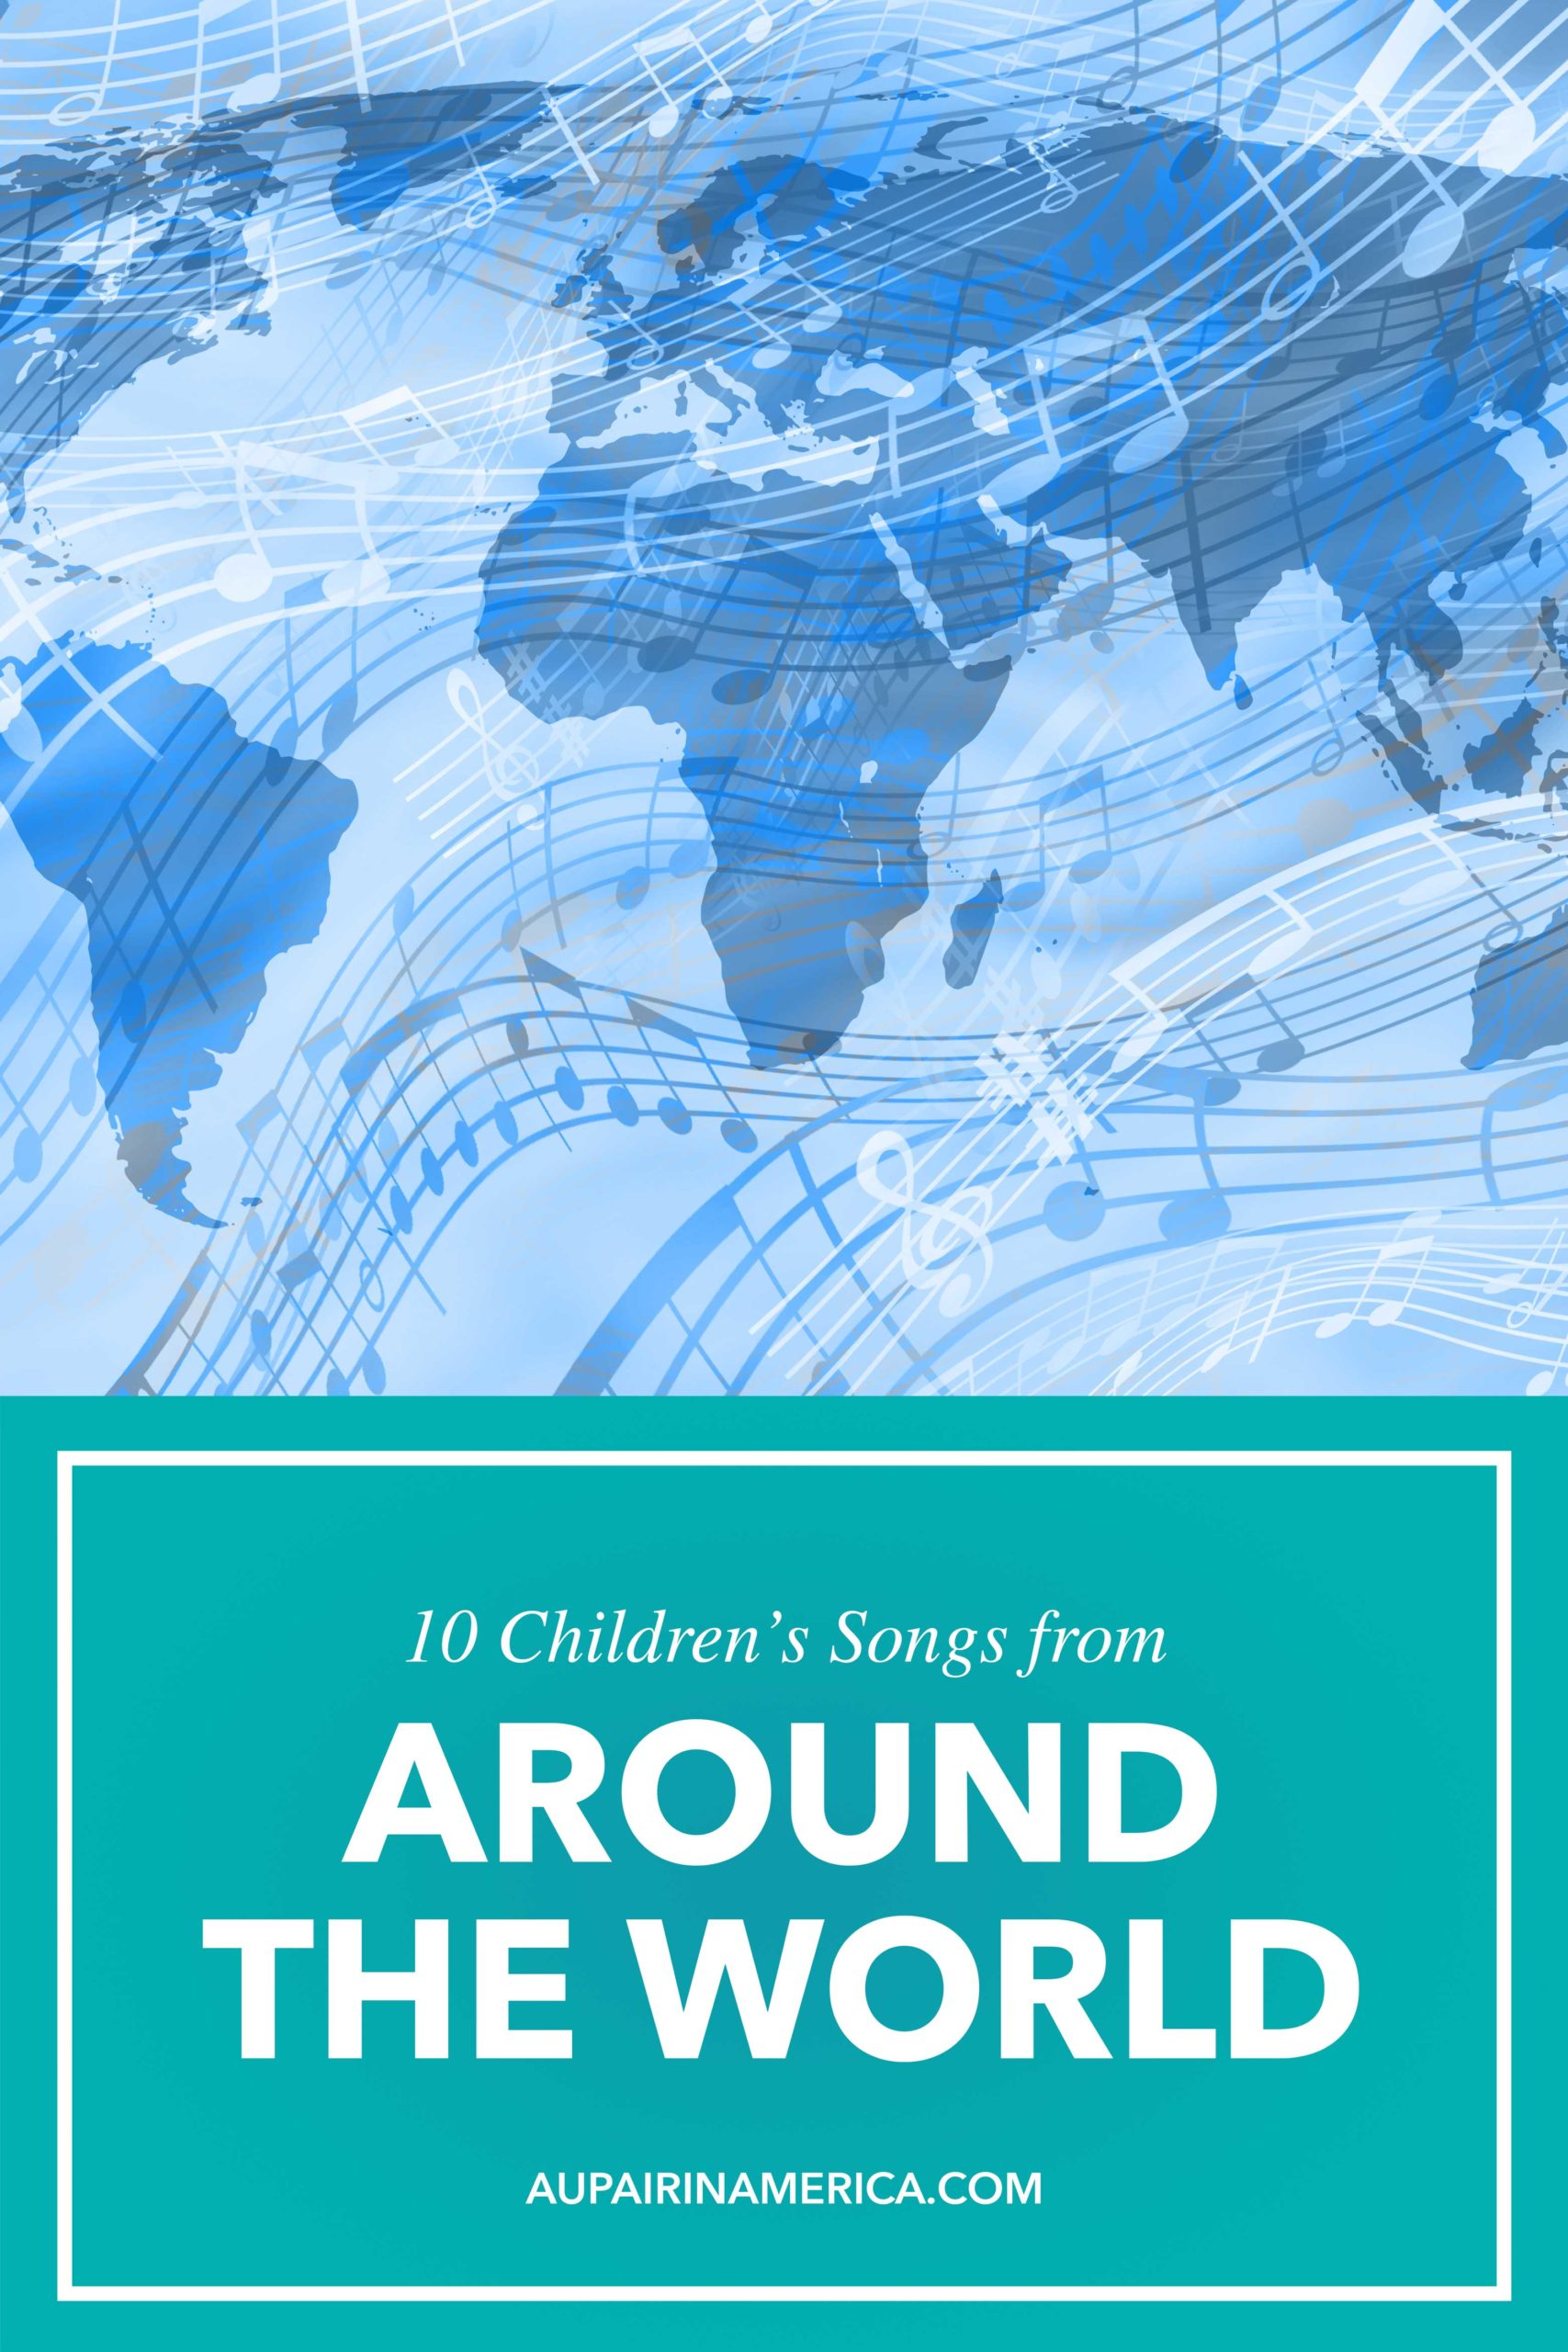 Give children a cultural education with these 10 children's songs from around the world!